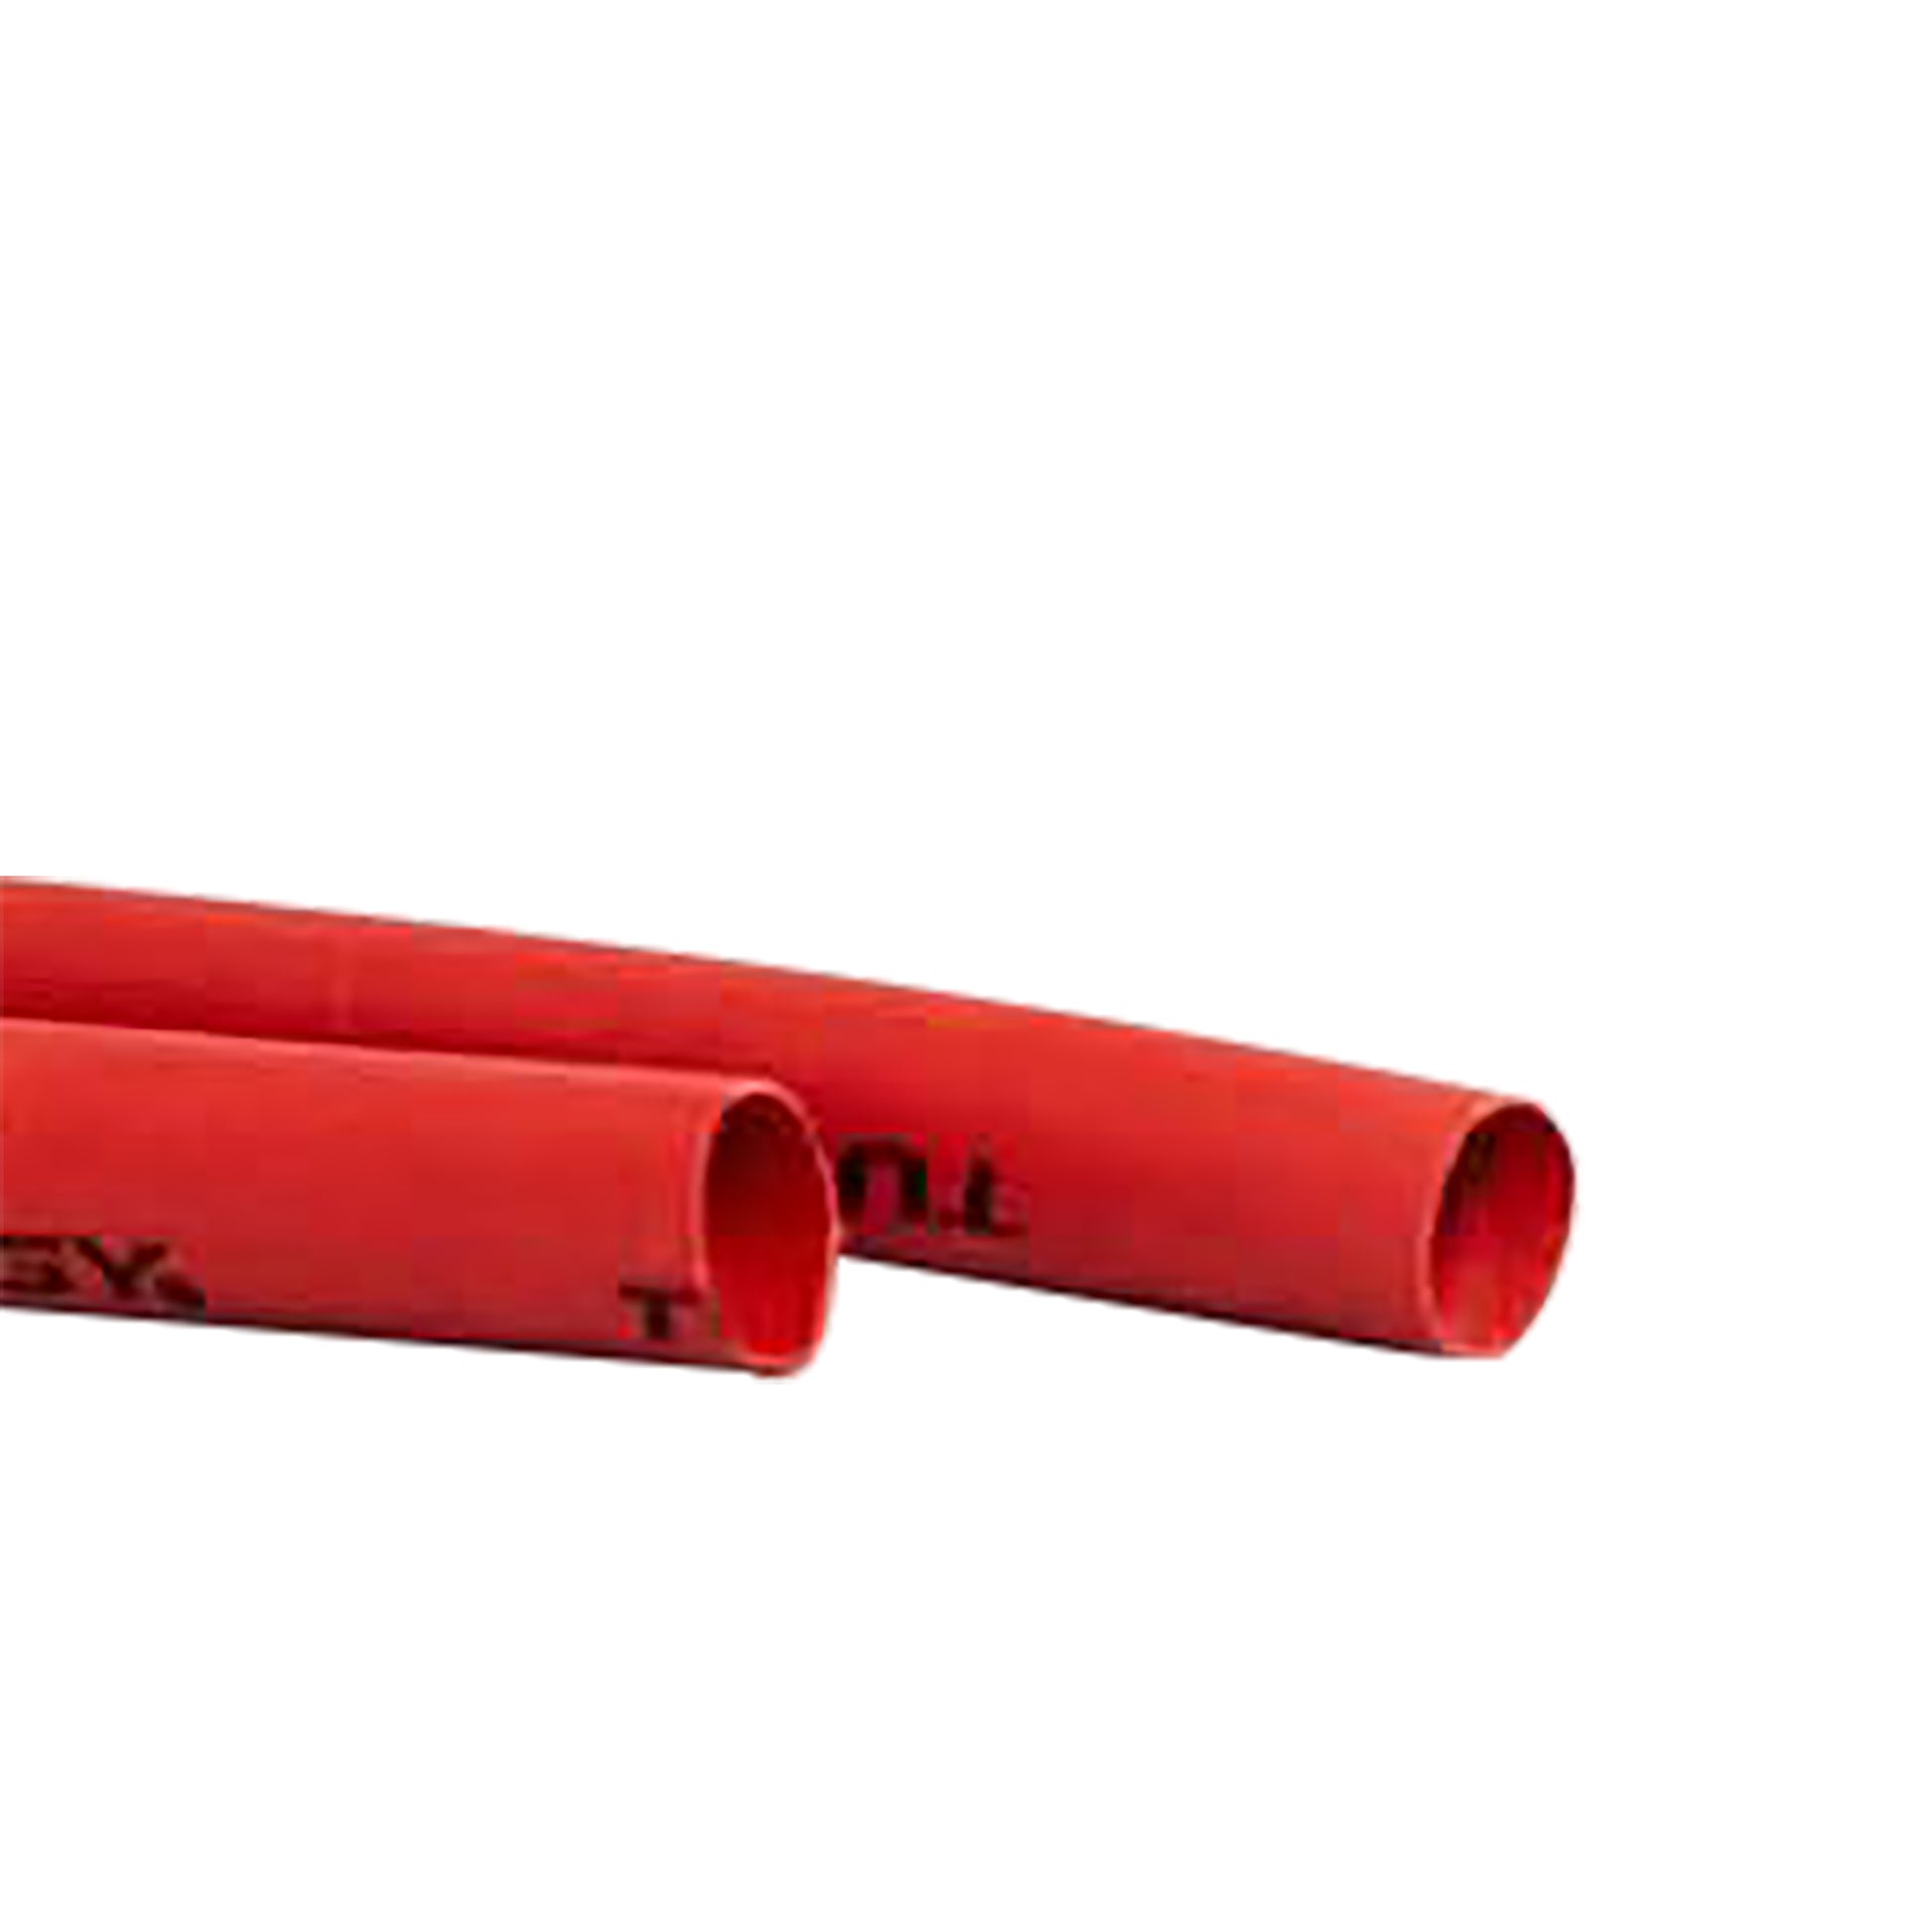 Flexible Thin Single Wall Non-Adhesive Heat Shrink Tubing 2:1 Red 3/8" ID - 48" Inch 4 Pack